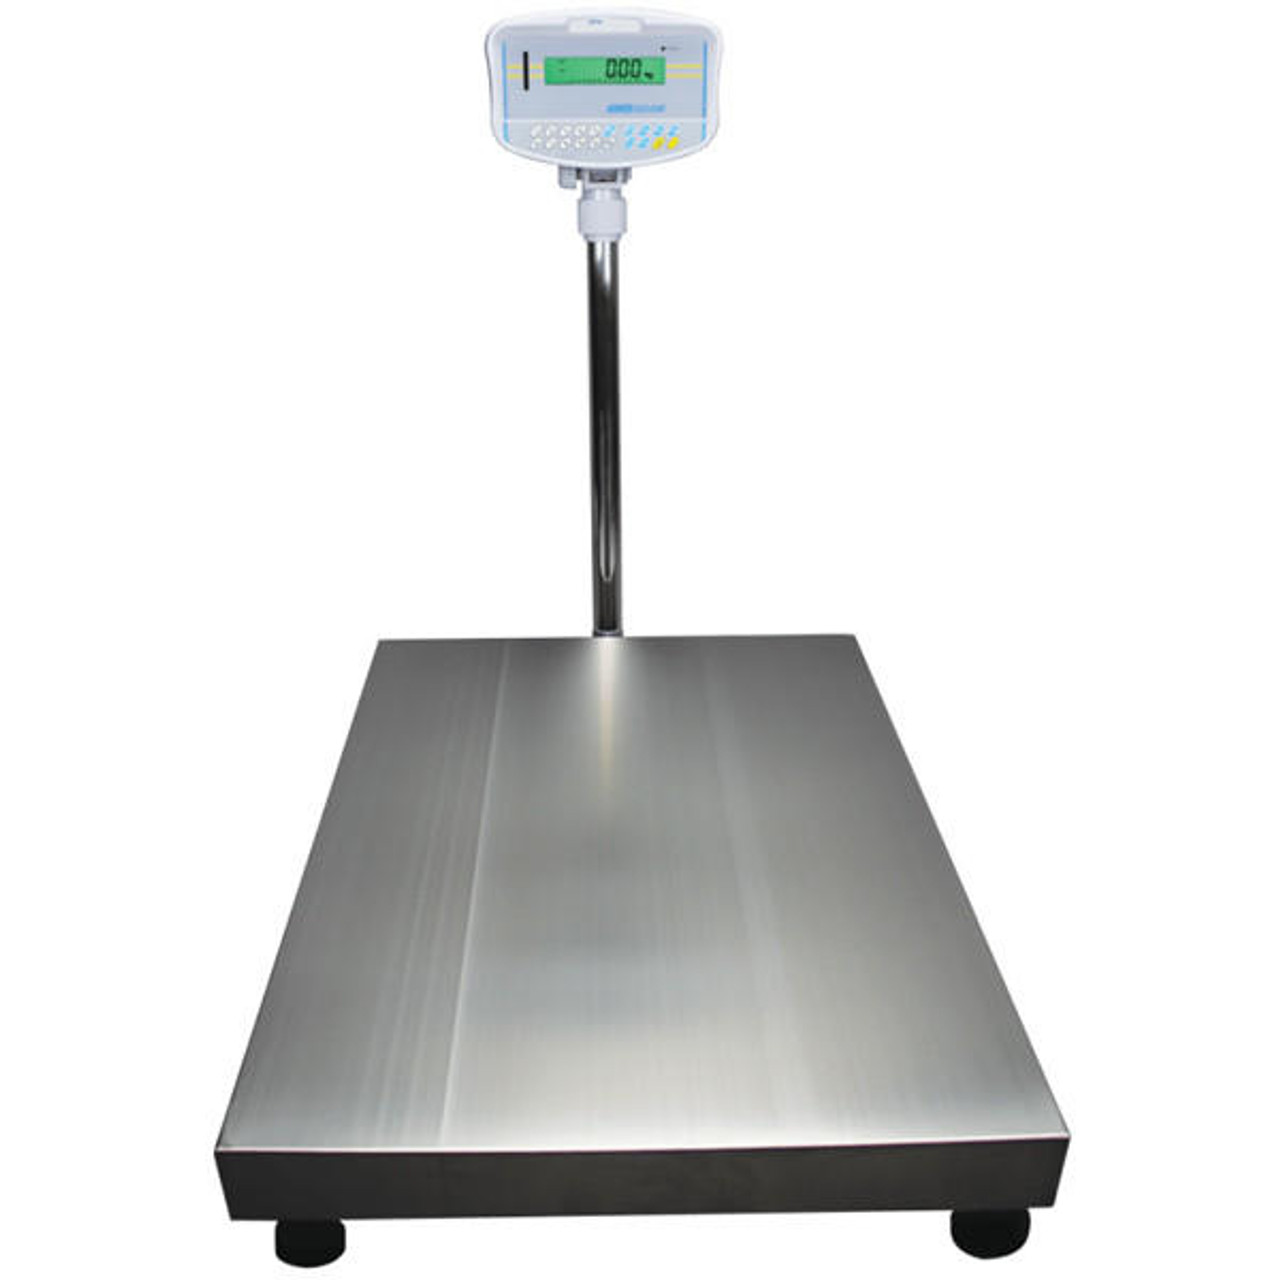 https://cdn11.bigcommerce.com/s-zgzol/images/stencil/1280x1280/products/13658/187618/adam-equipment-gfk-300am-floor-checkweighing-scale-300lb-x-0.05lb__21758.1677211679.jpg?c=2